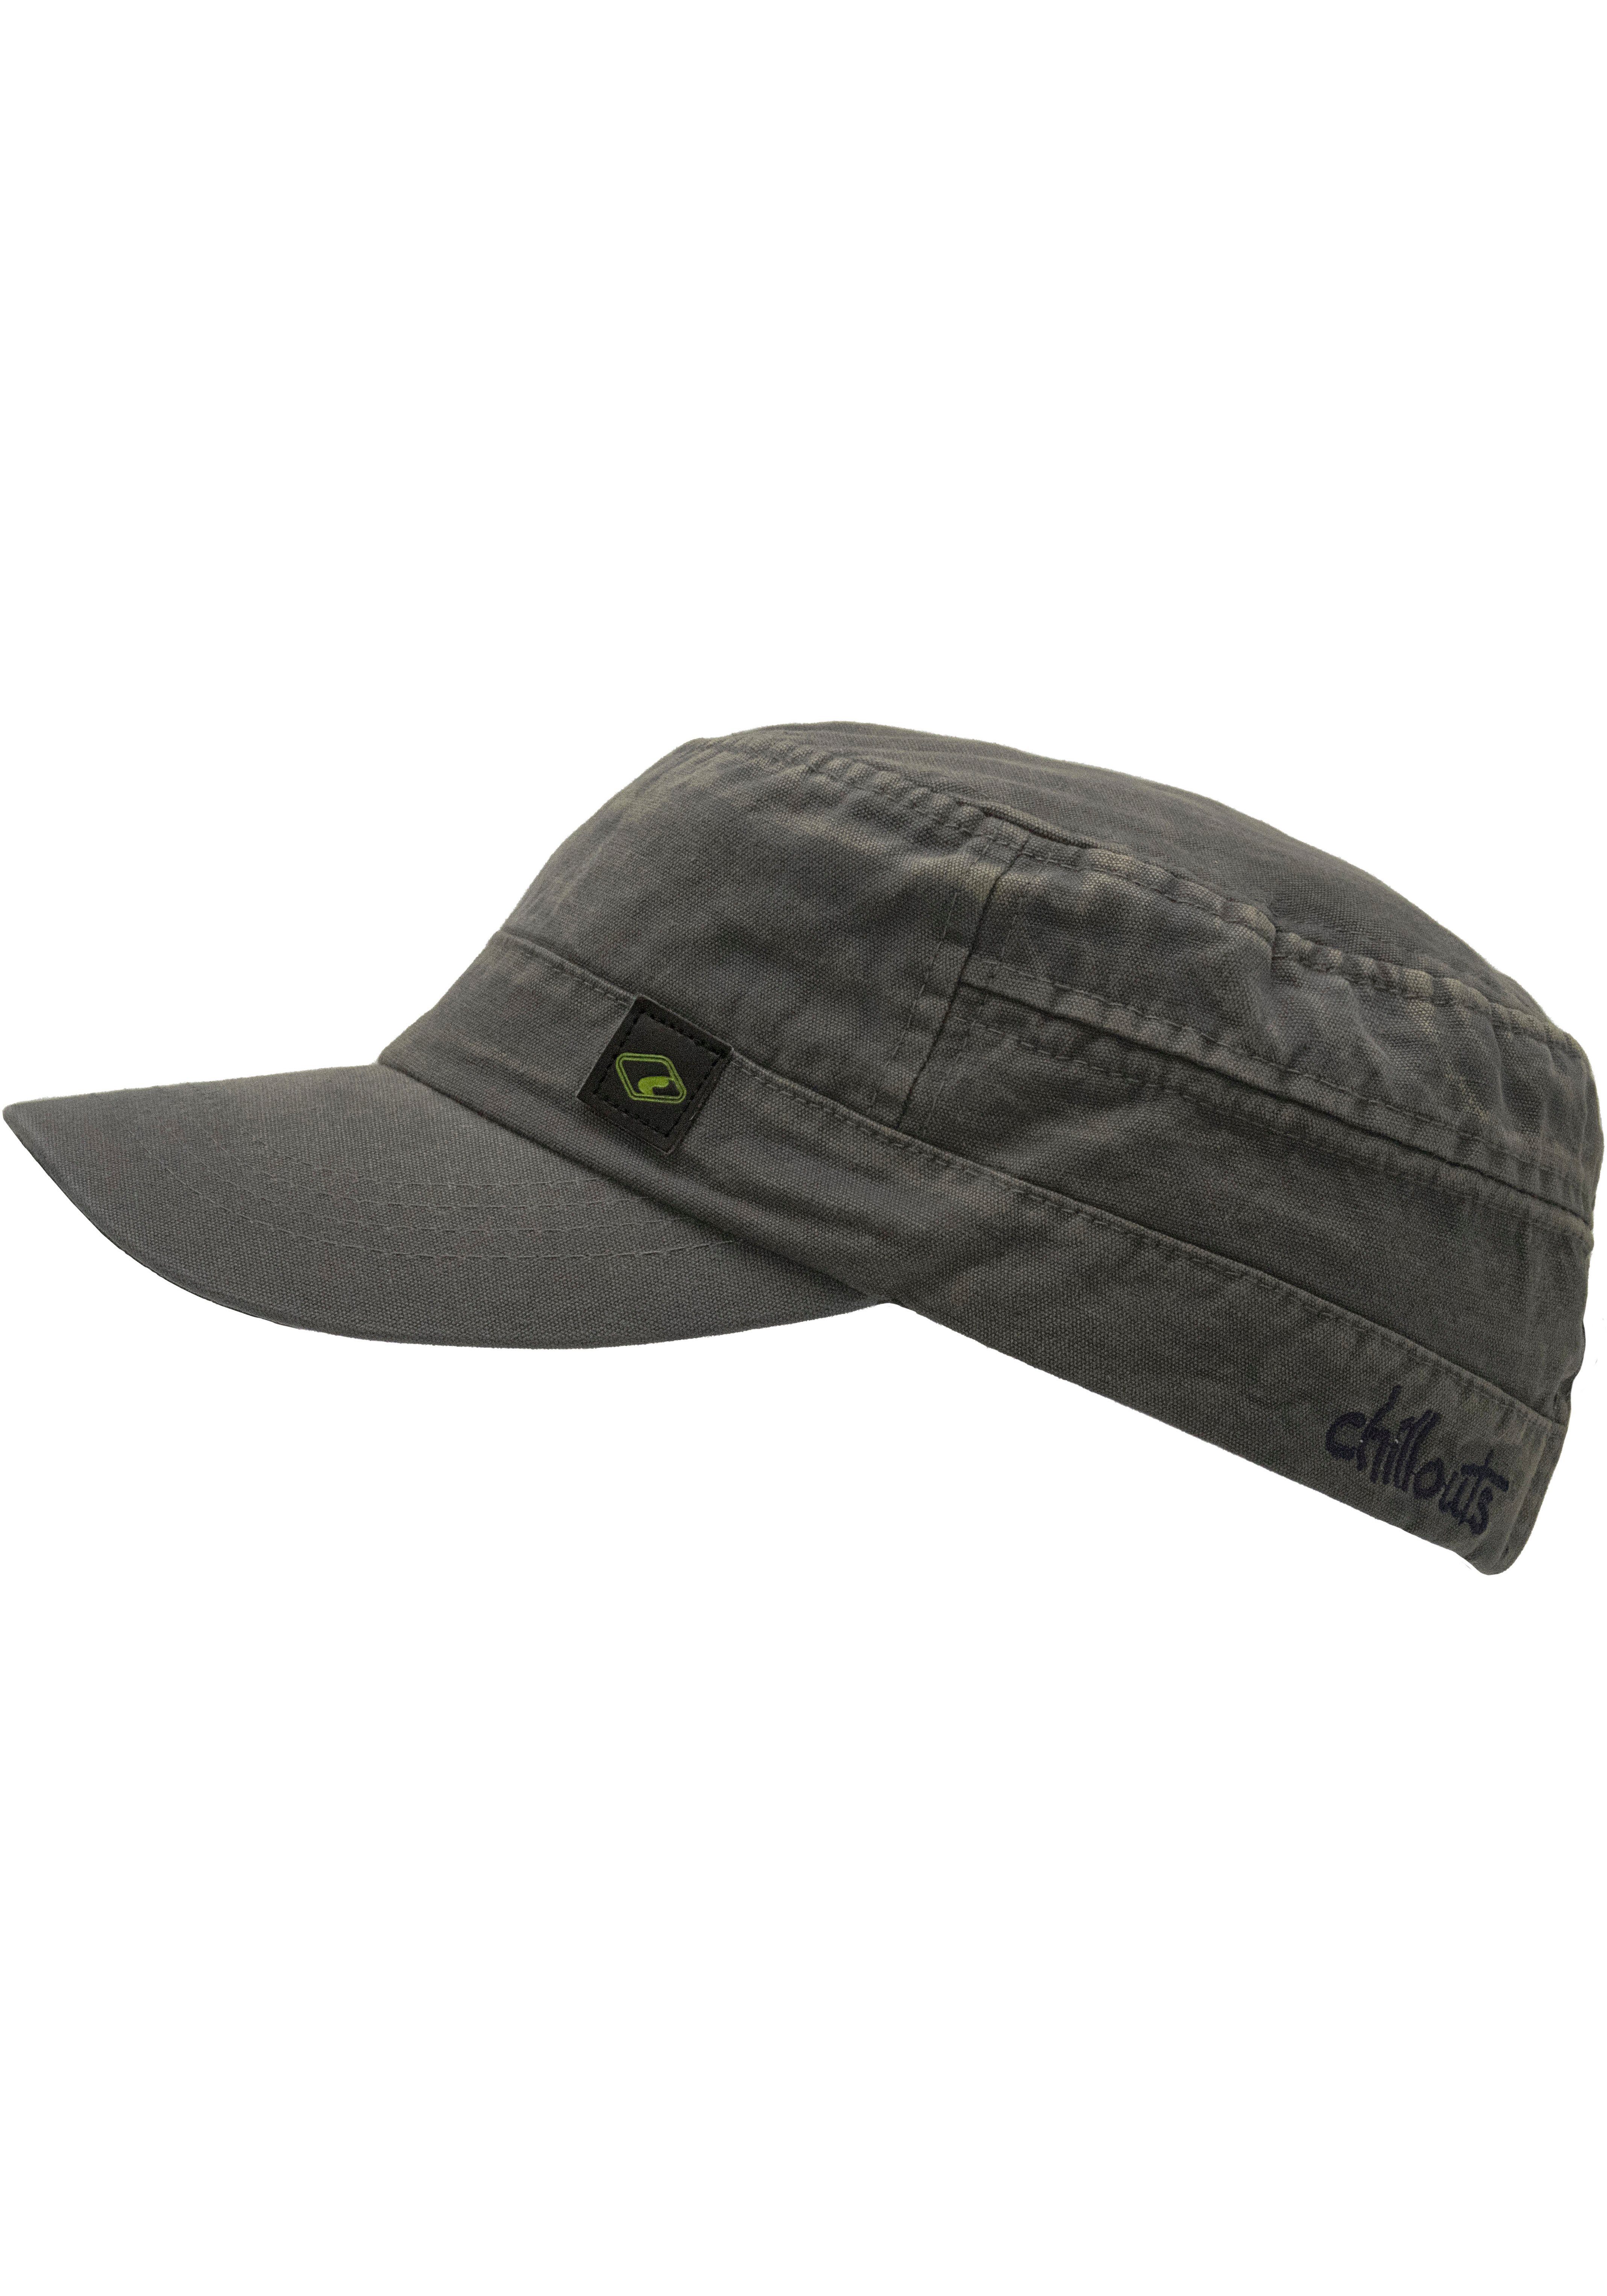 Army Hat reiner El grey Cap Size Paso Baumwolle, washed atmungsaktiv, chillouts aus One